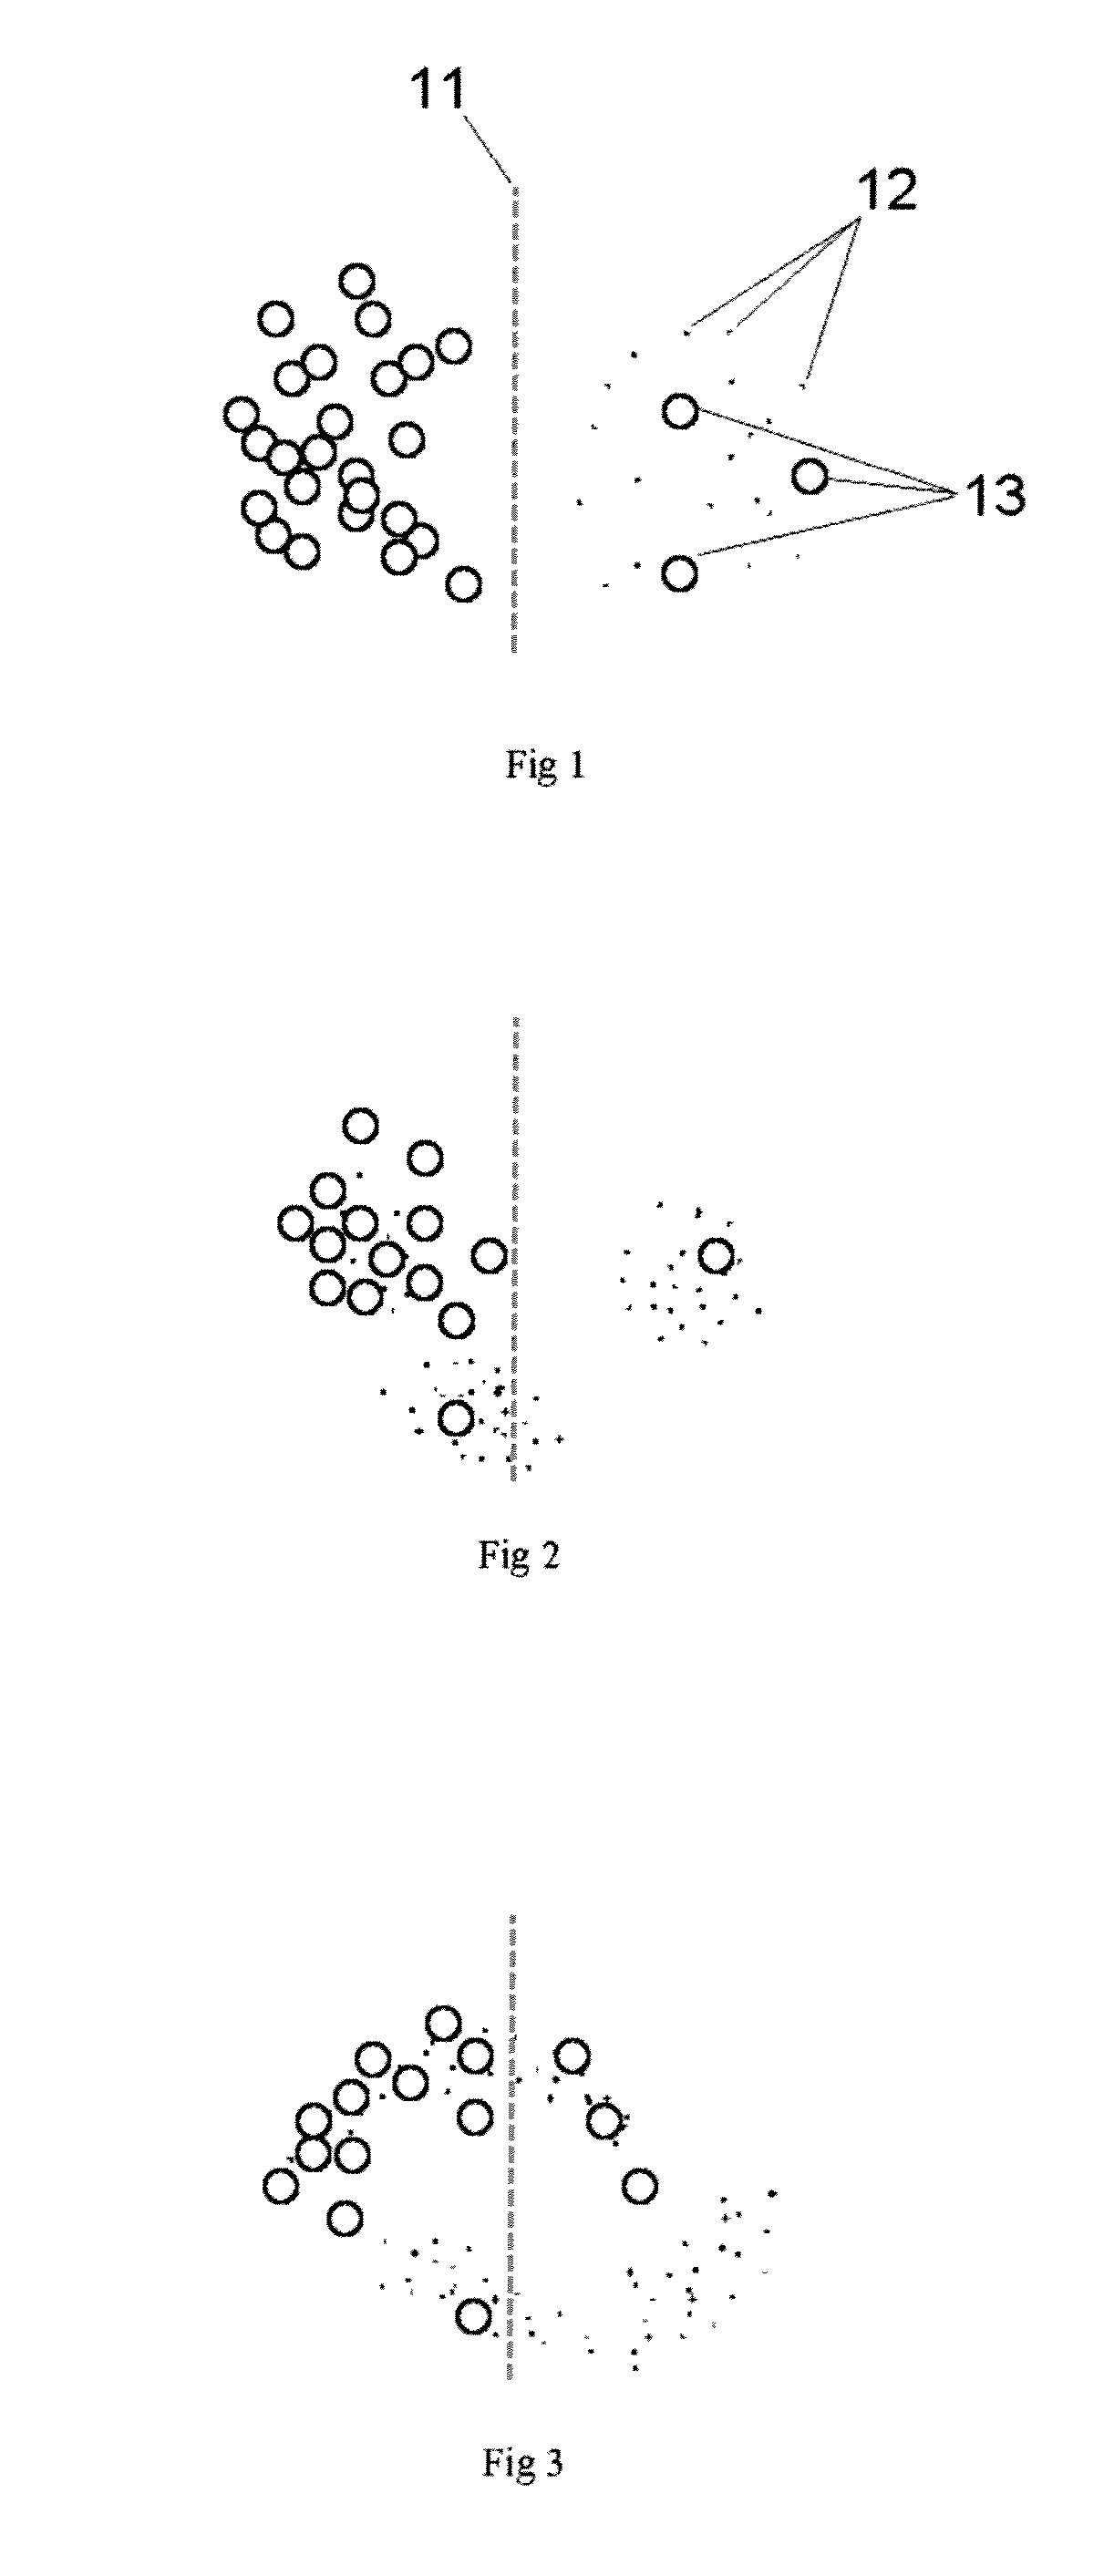 System and Method for Joint Classification Using Feature Space Cluster Labels